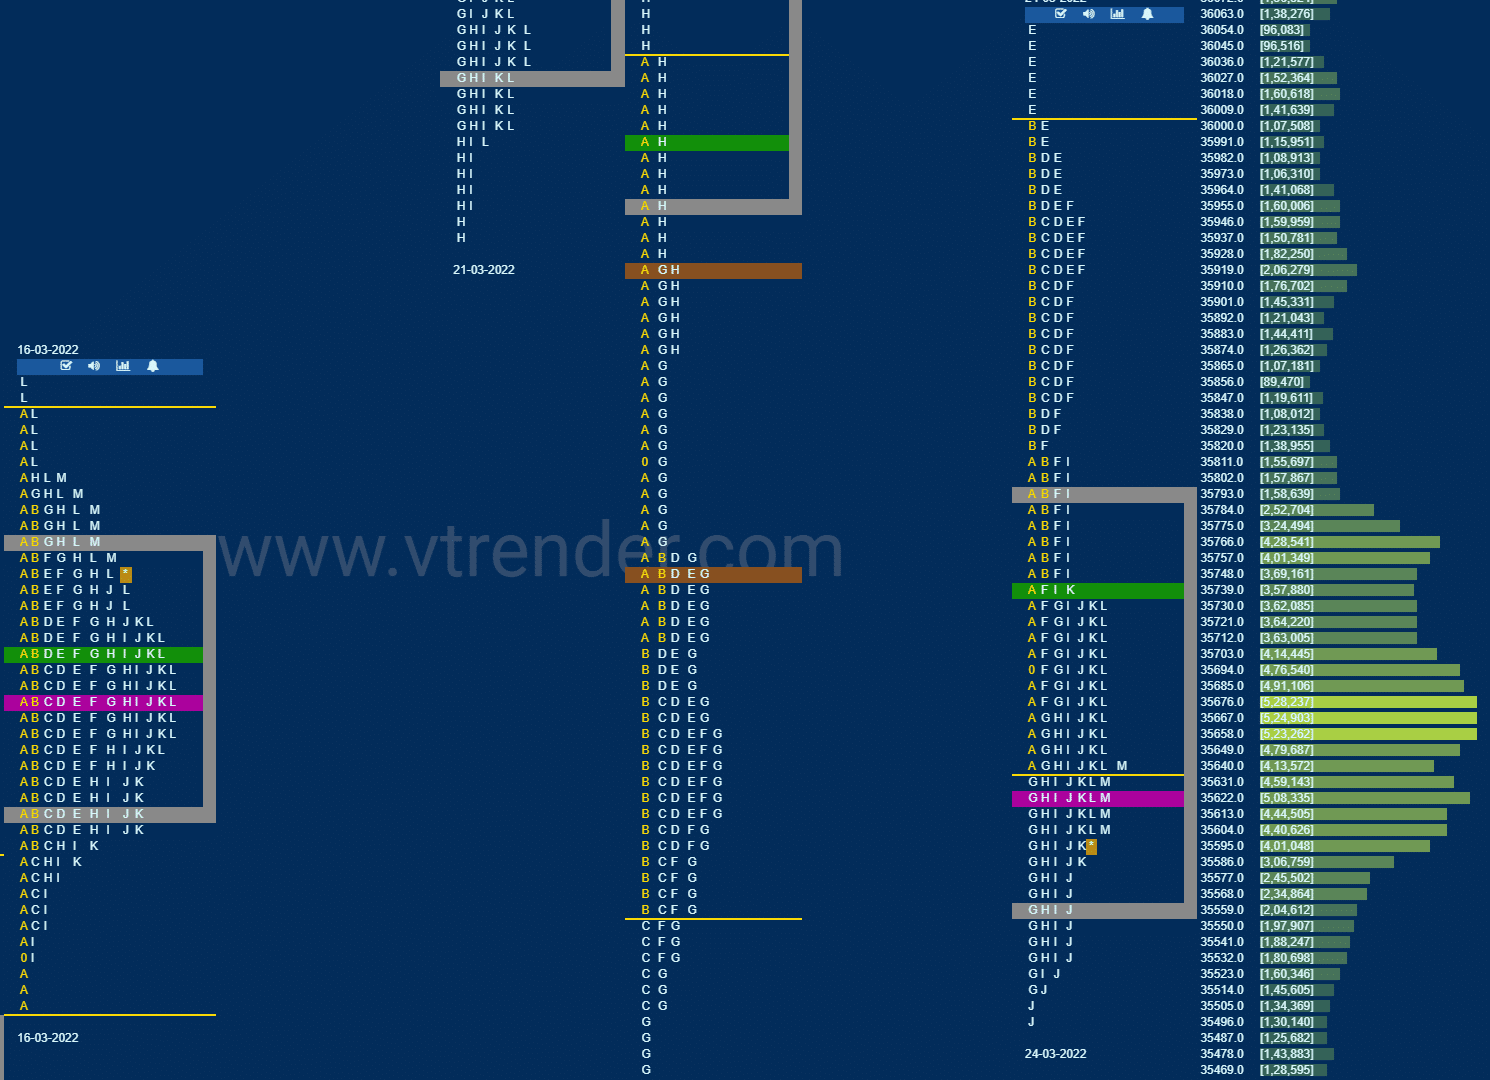 Bnf 15 Market Profile Analysis Dated 24Th March 2022 Banknifty Futures, Charts, Day Trading, Intraday Trading, Intraday Trading Strategies, Market Profile, Market Profile Trading Strategies, Nifty Futures, Order Flow Analysis, Support And Resistance, Technical Analysis, Trading Strategies, Volume Profile Trading